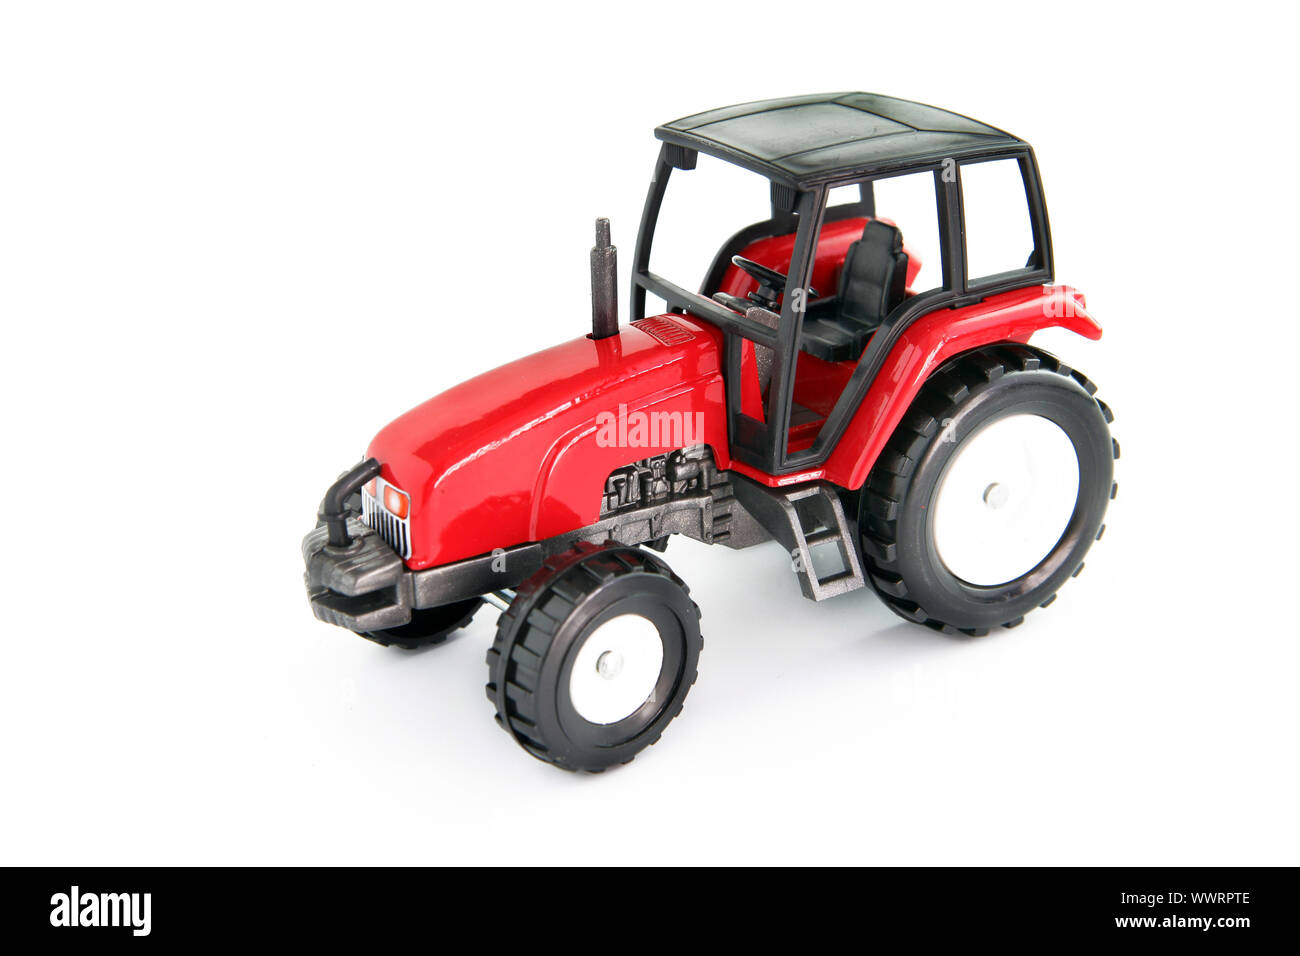 Toy tractor Stock Photo